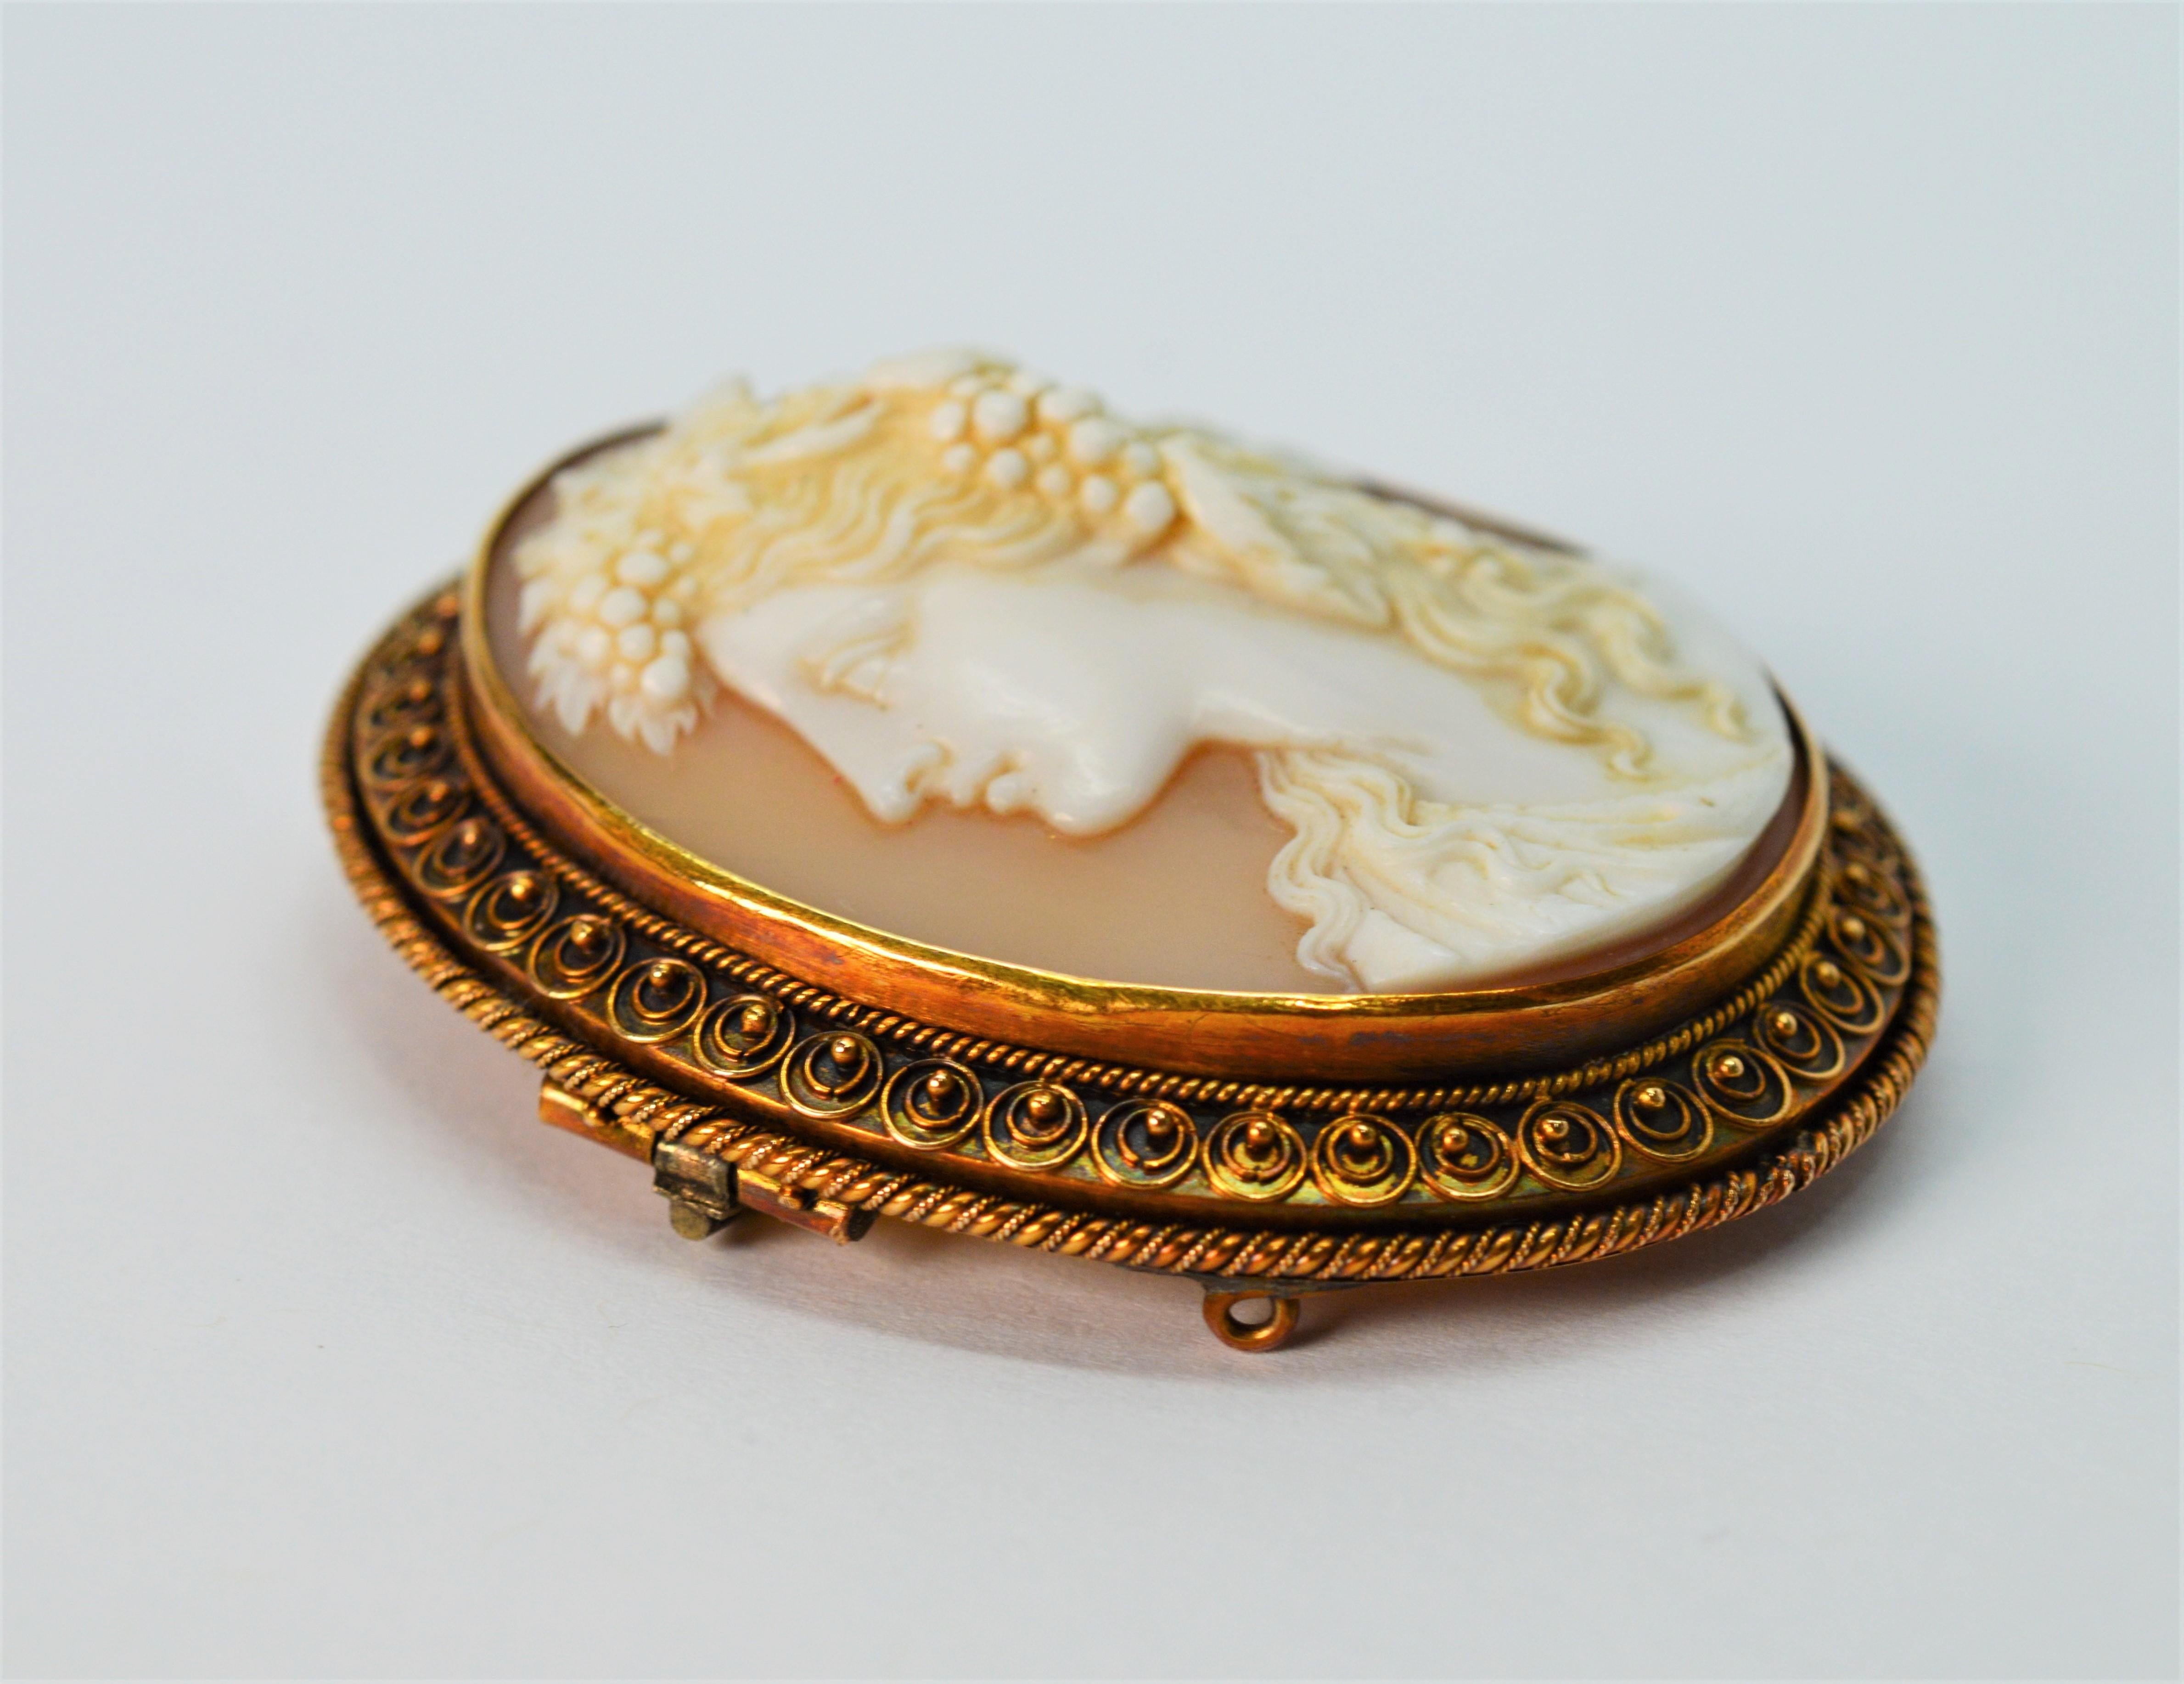 Women's 19th Century Italian High Relief Cameo Gold Brooch